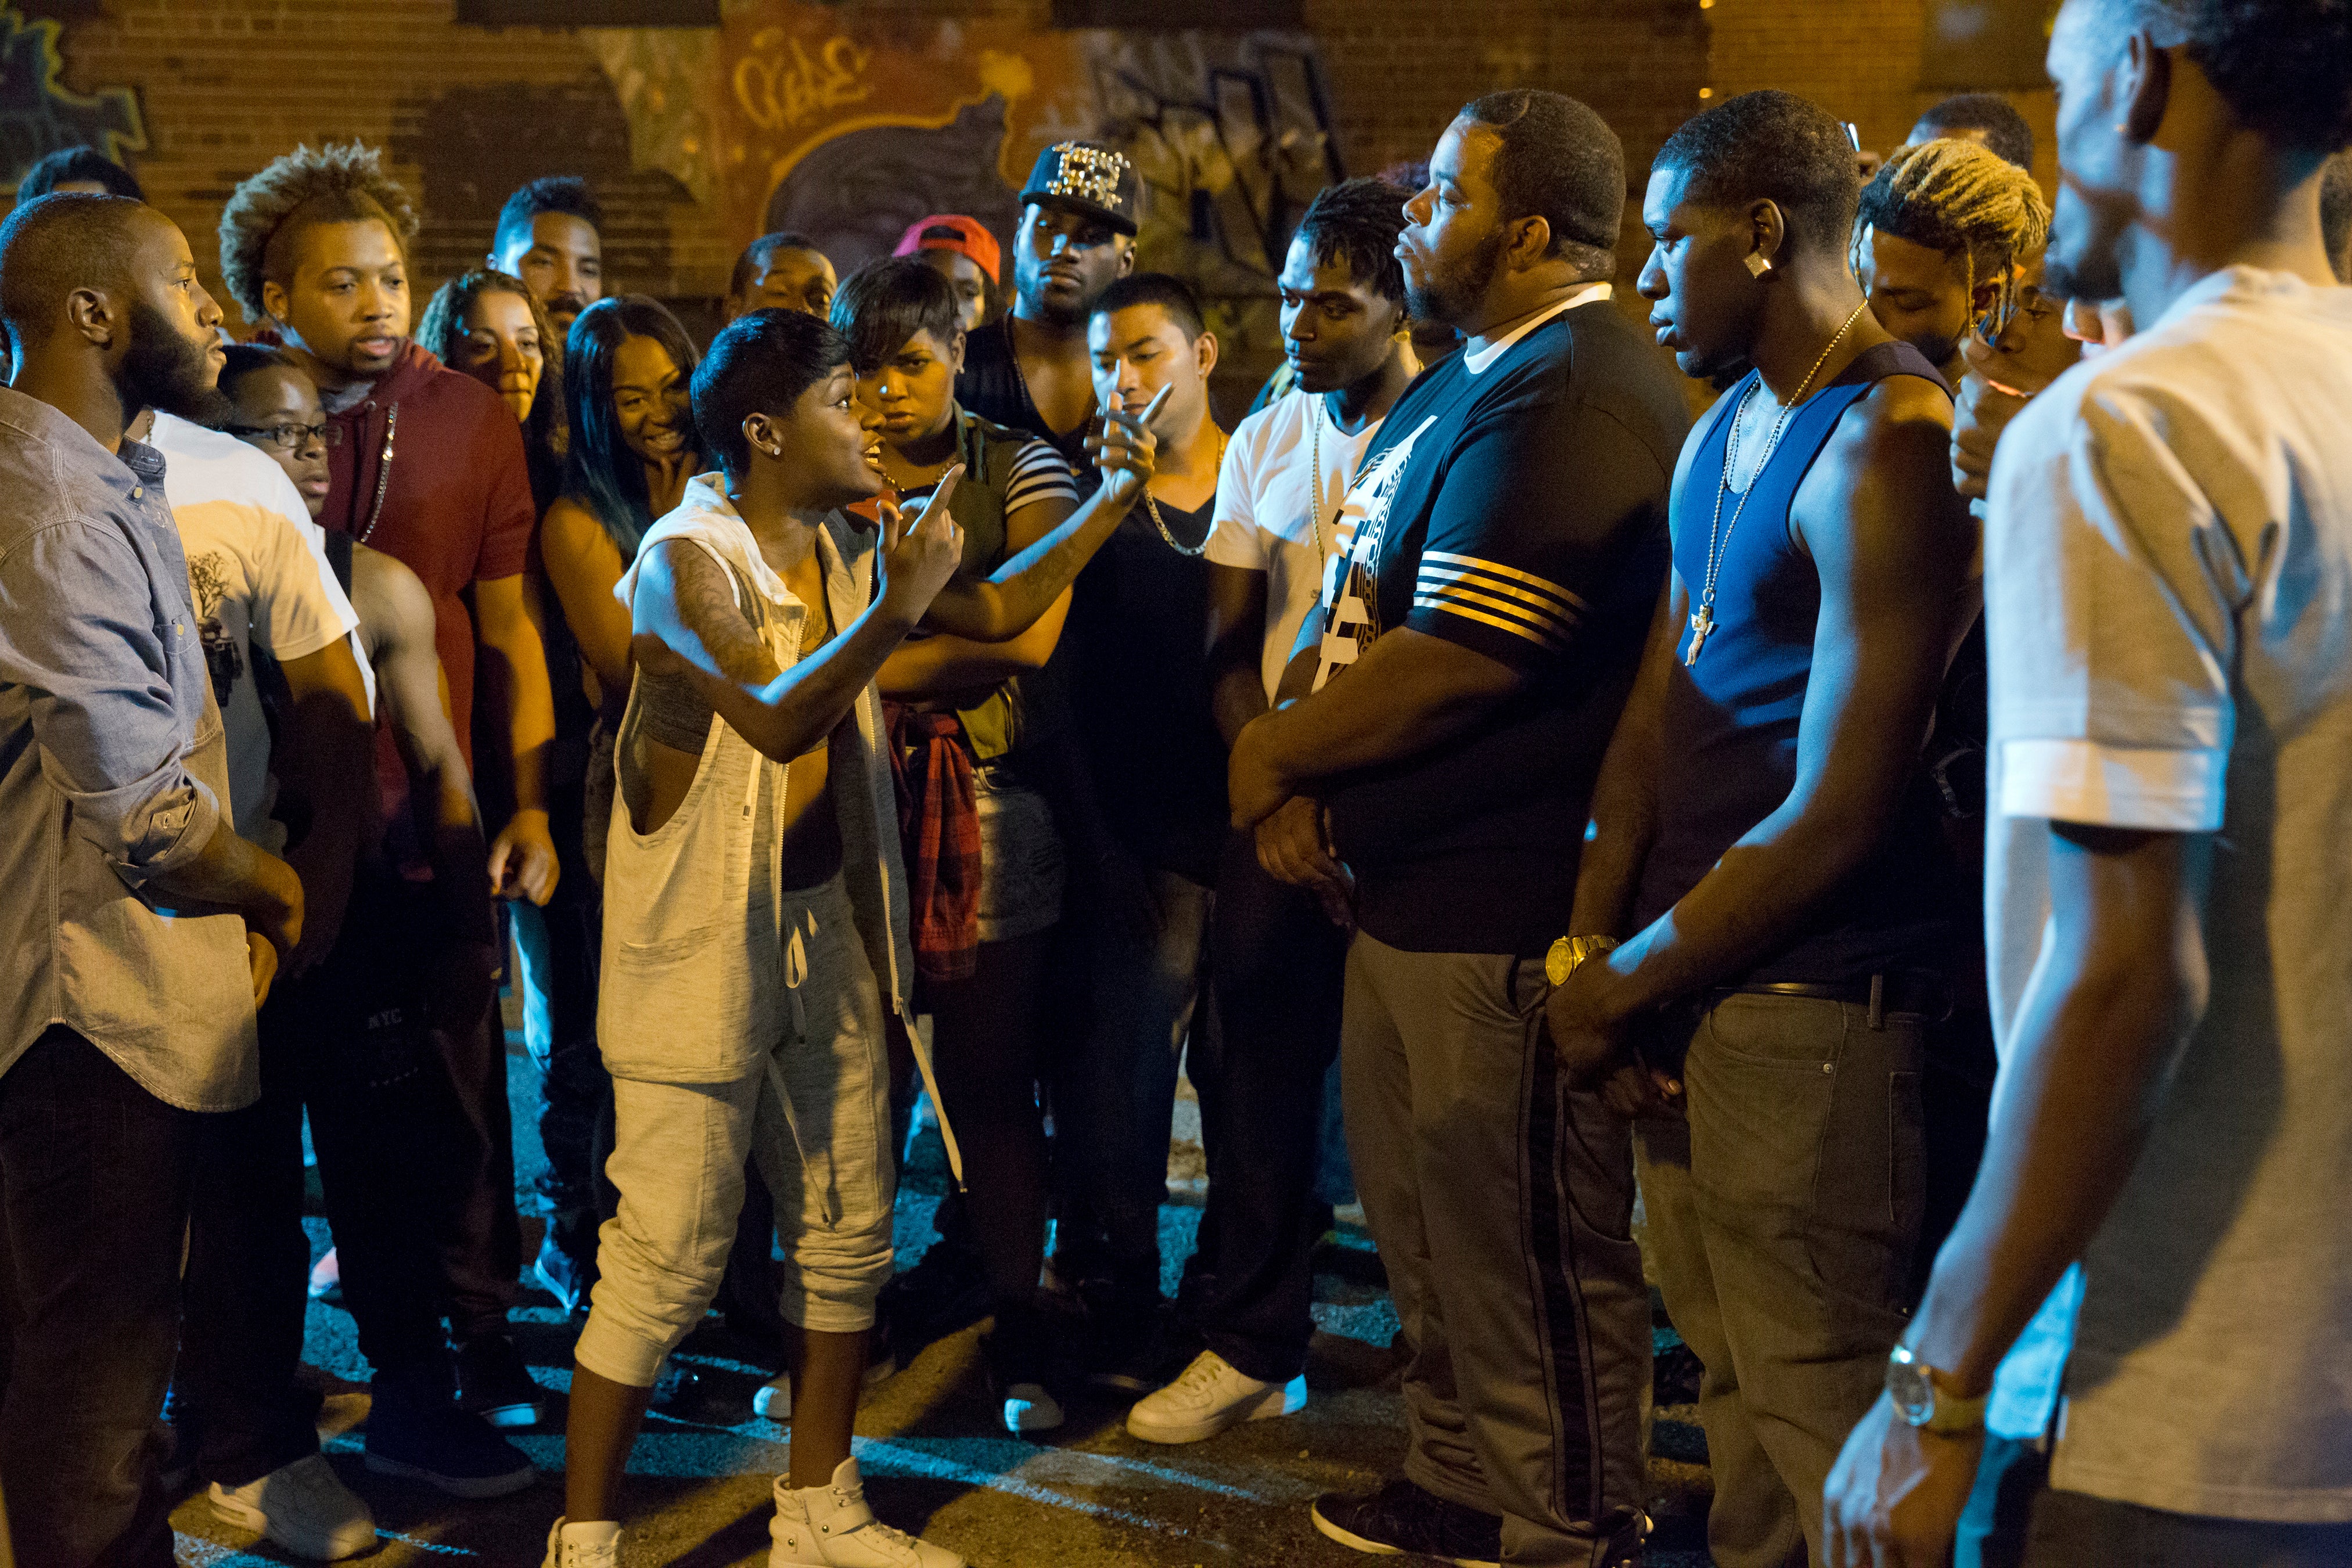 Get Your "Empire" Fix with a Sneak Peek Episode 3
